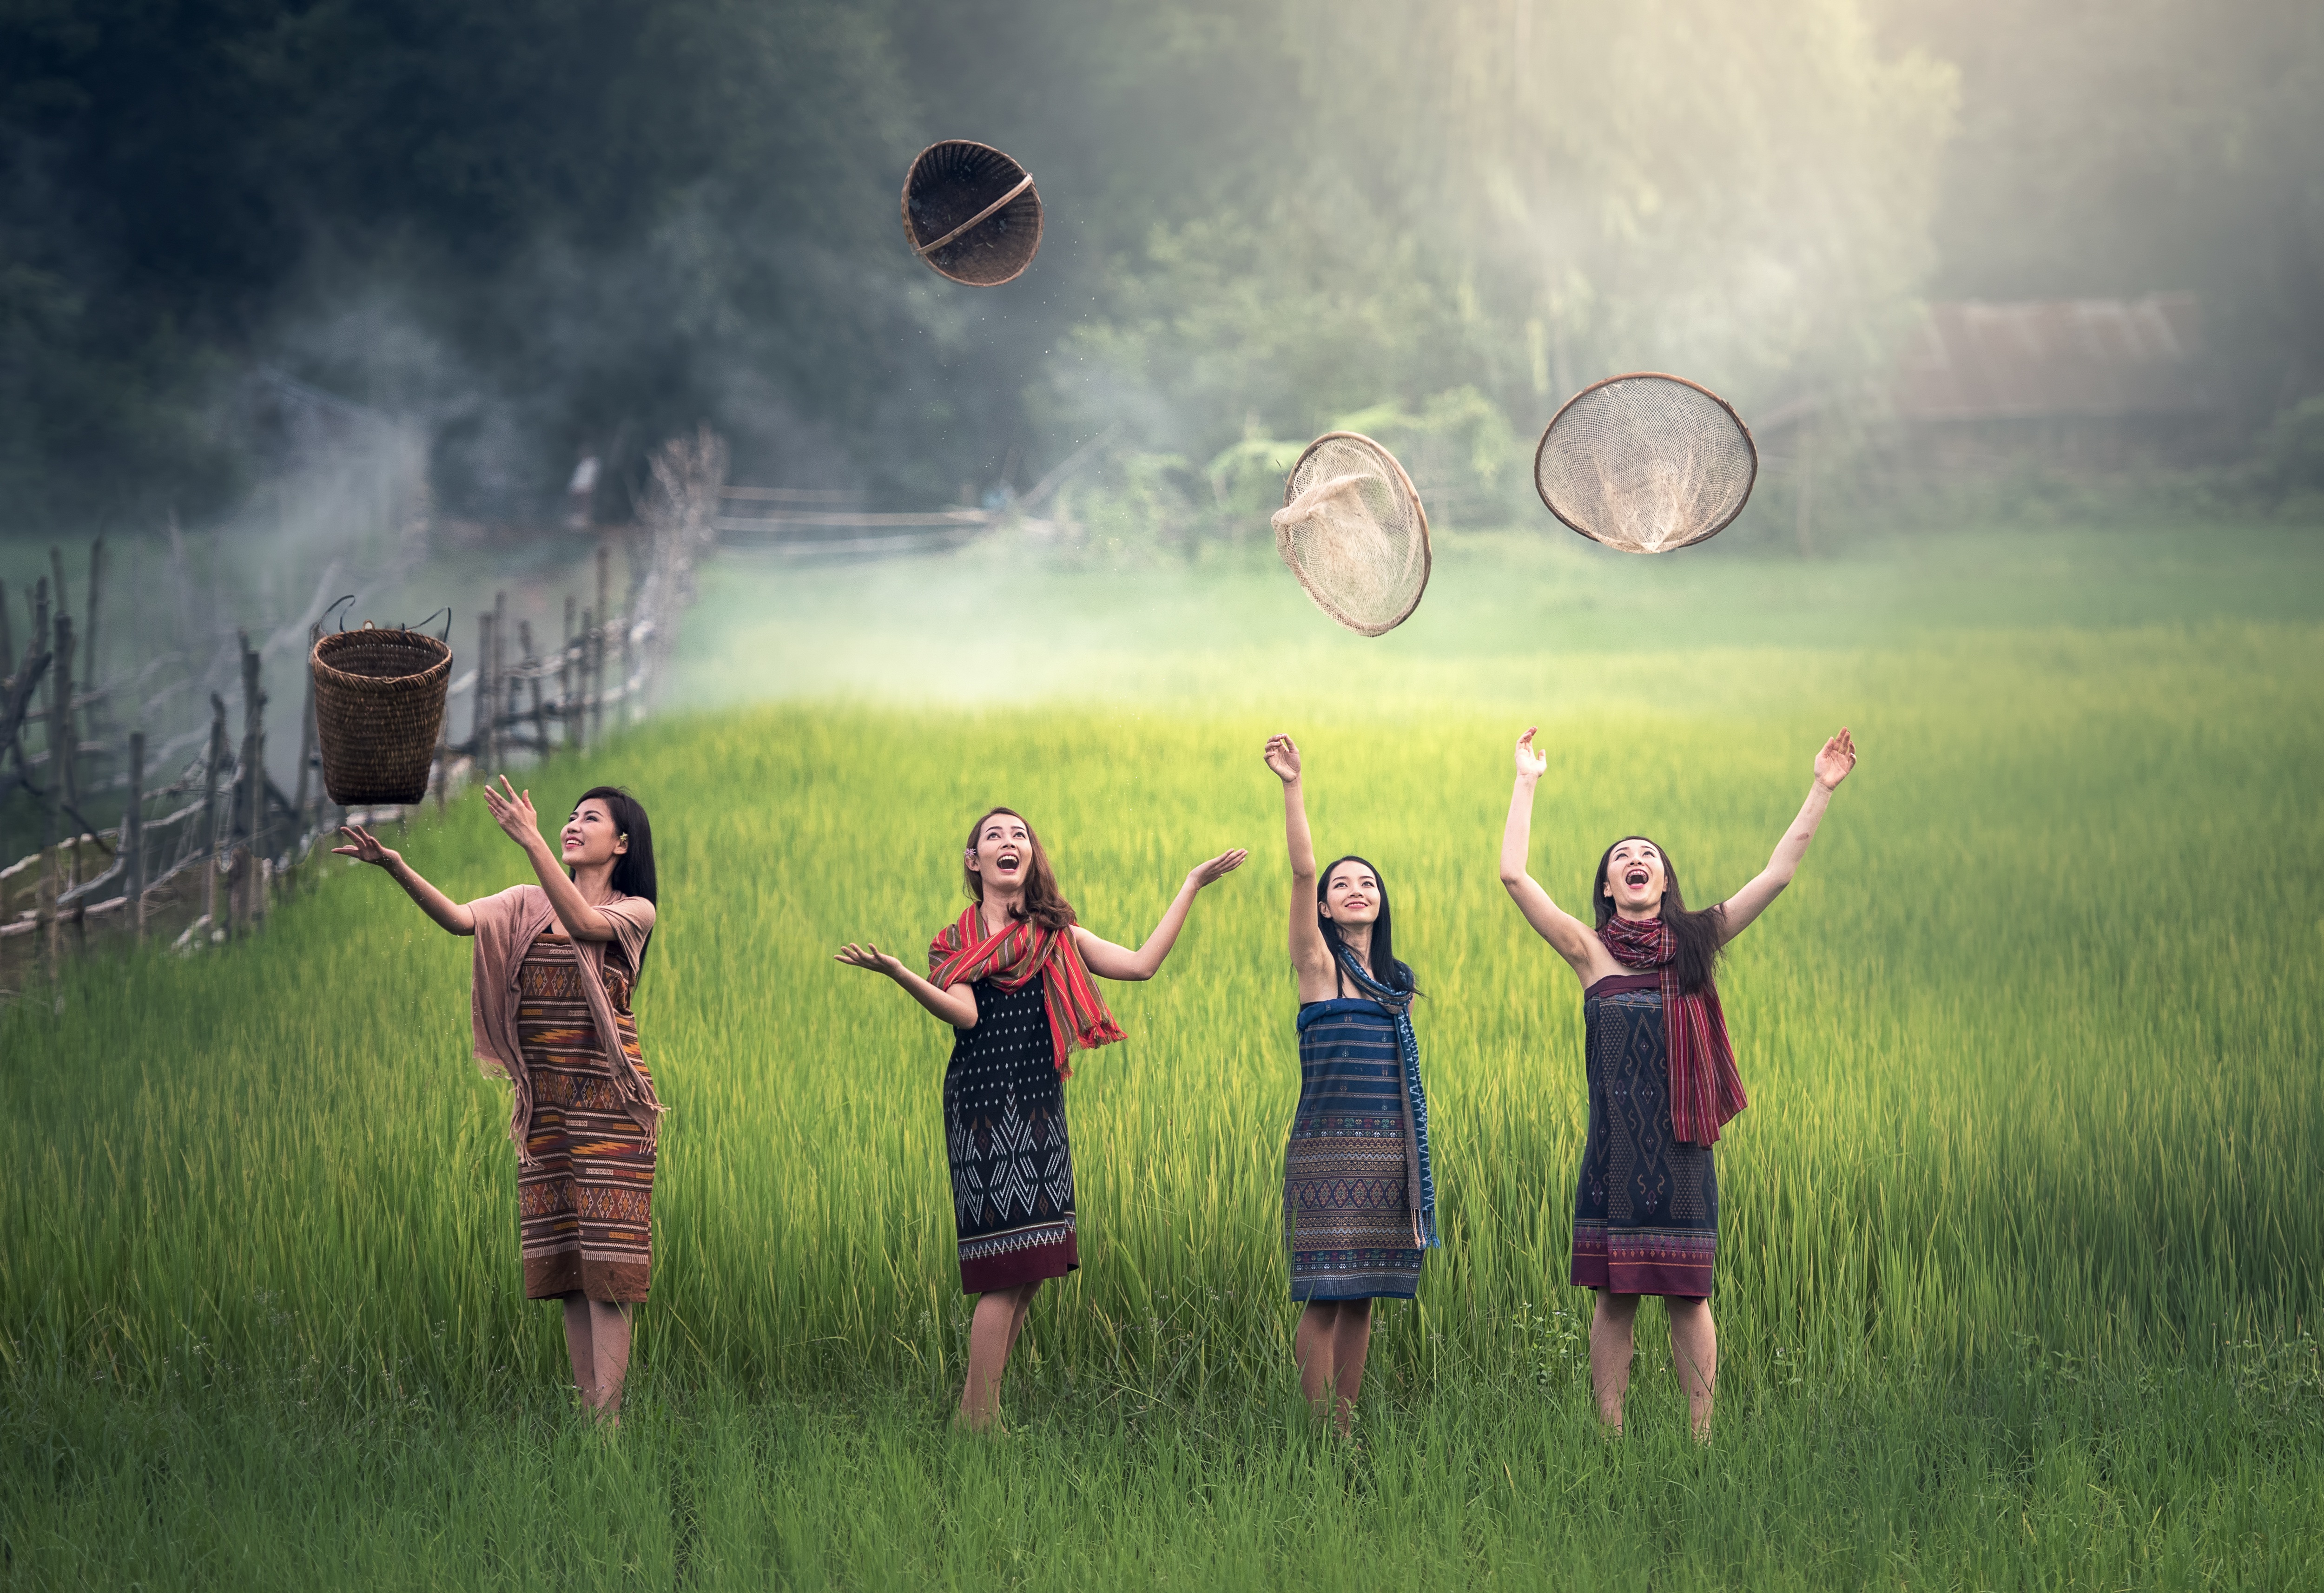 Image Outdoor Light People Girl Woman Countryside